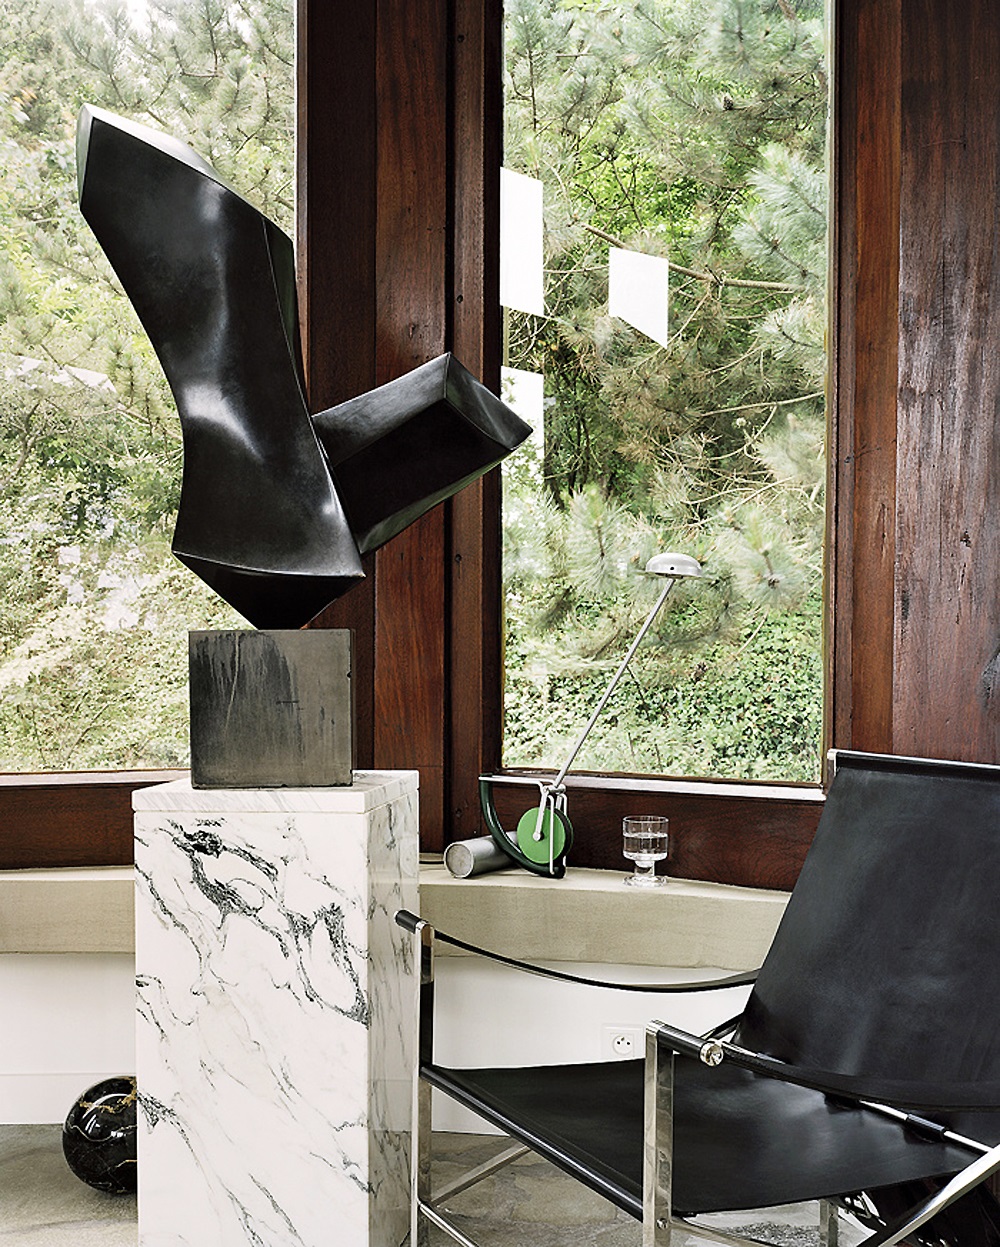 Sculpture by Luiza Miller, Armchair by Maxime Old, Lamp by Martine Bedin